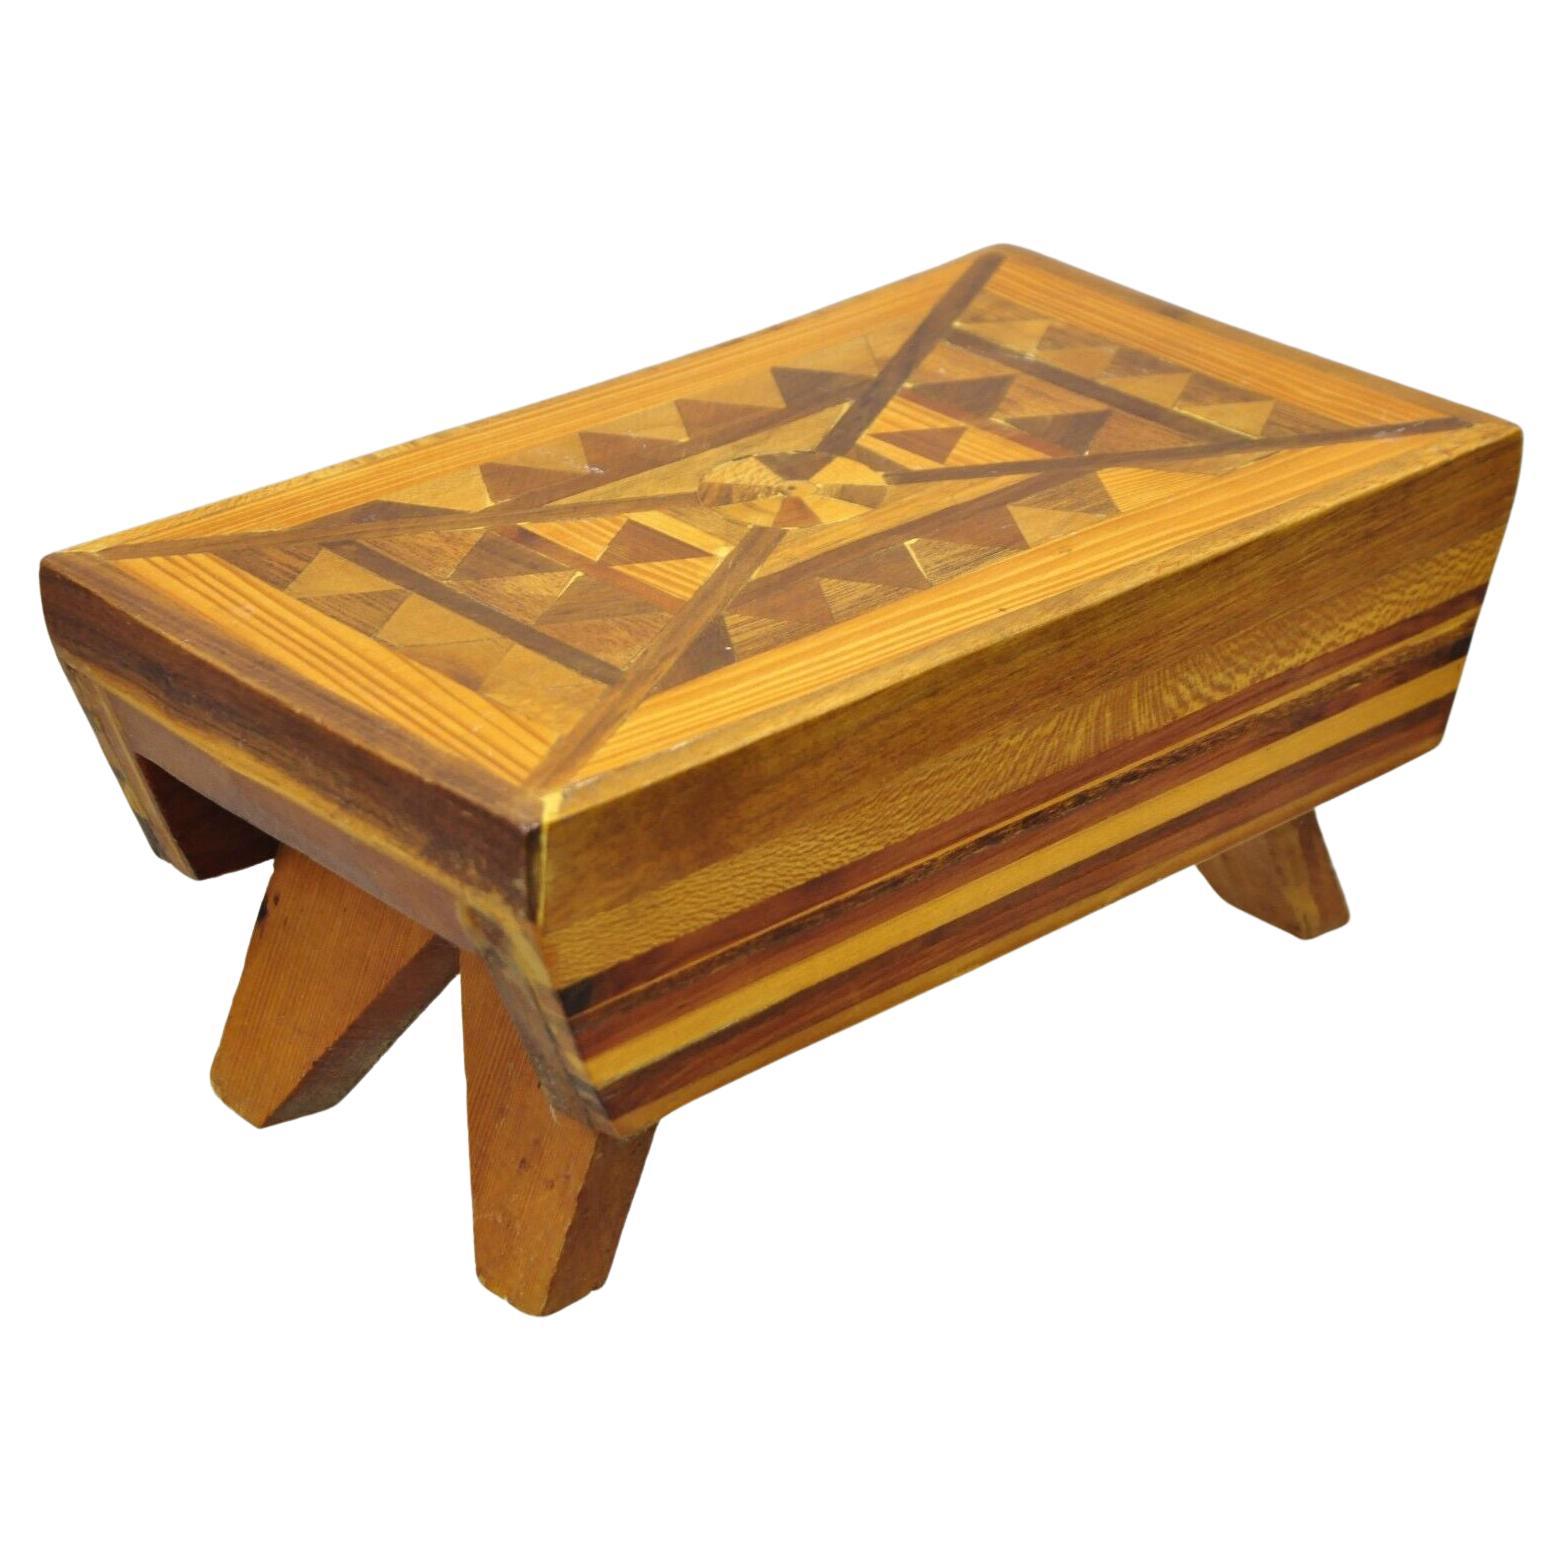 Vintage Folk Art Marquetry Inlay Small Footstool Ottoman Stool For Sale